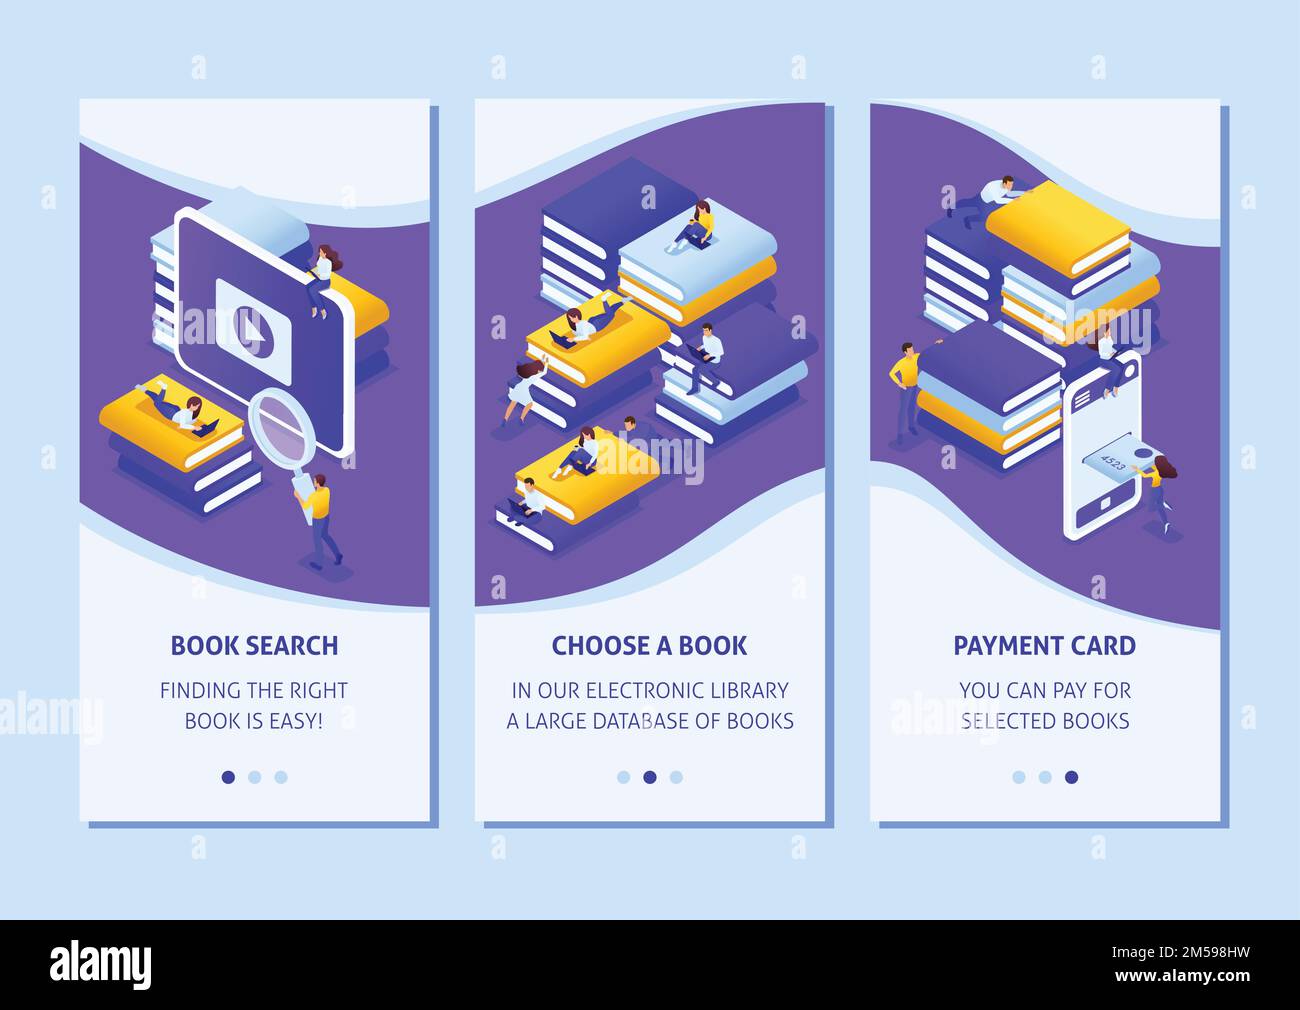 Isometric Template app design concept choose the right your book in our library smartphone apps. Easy to edit and customize. Stock Vector